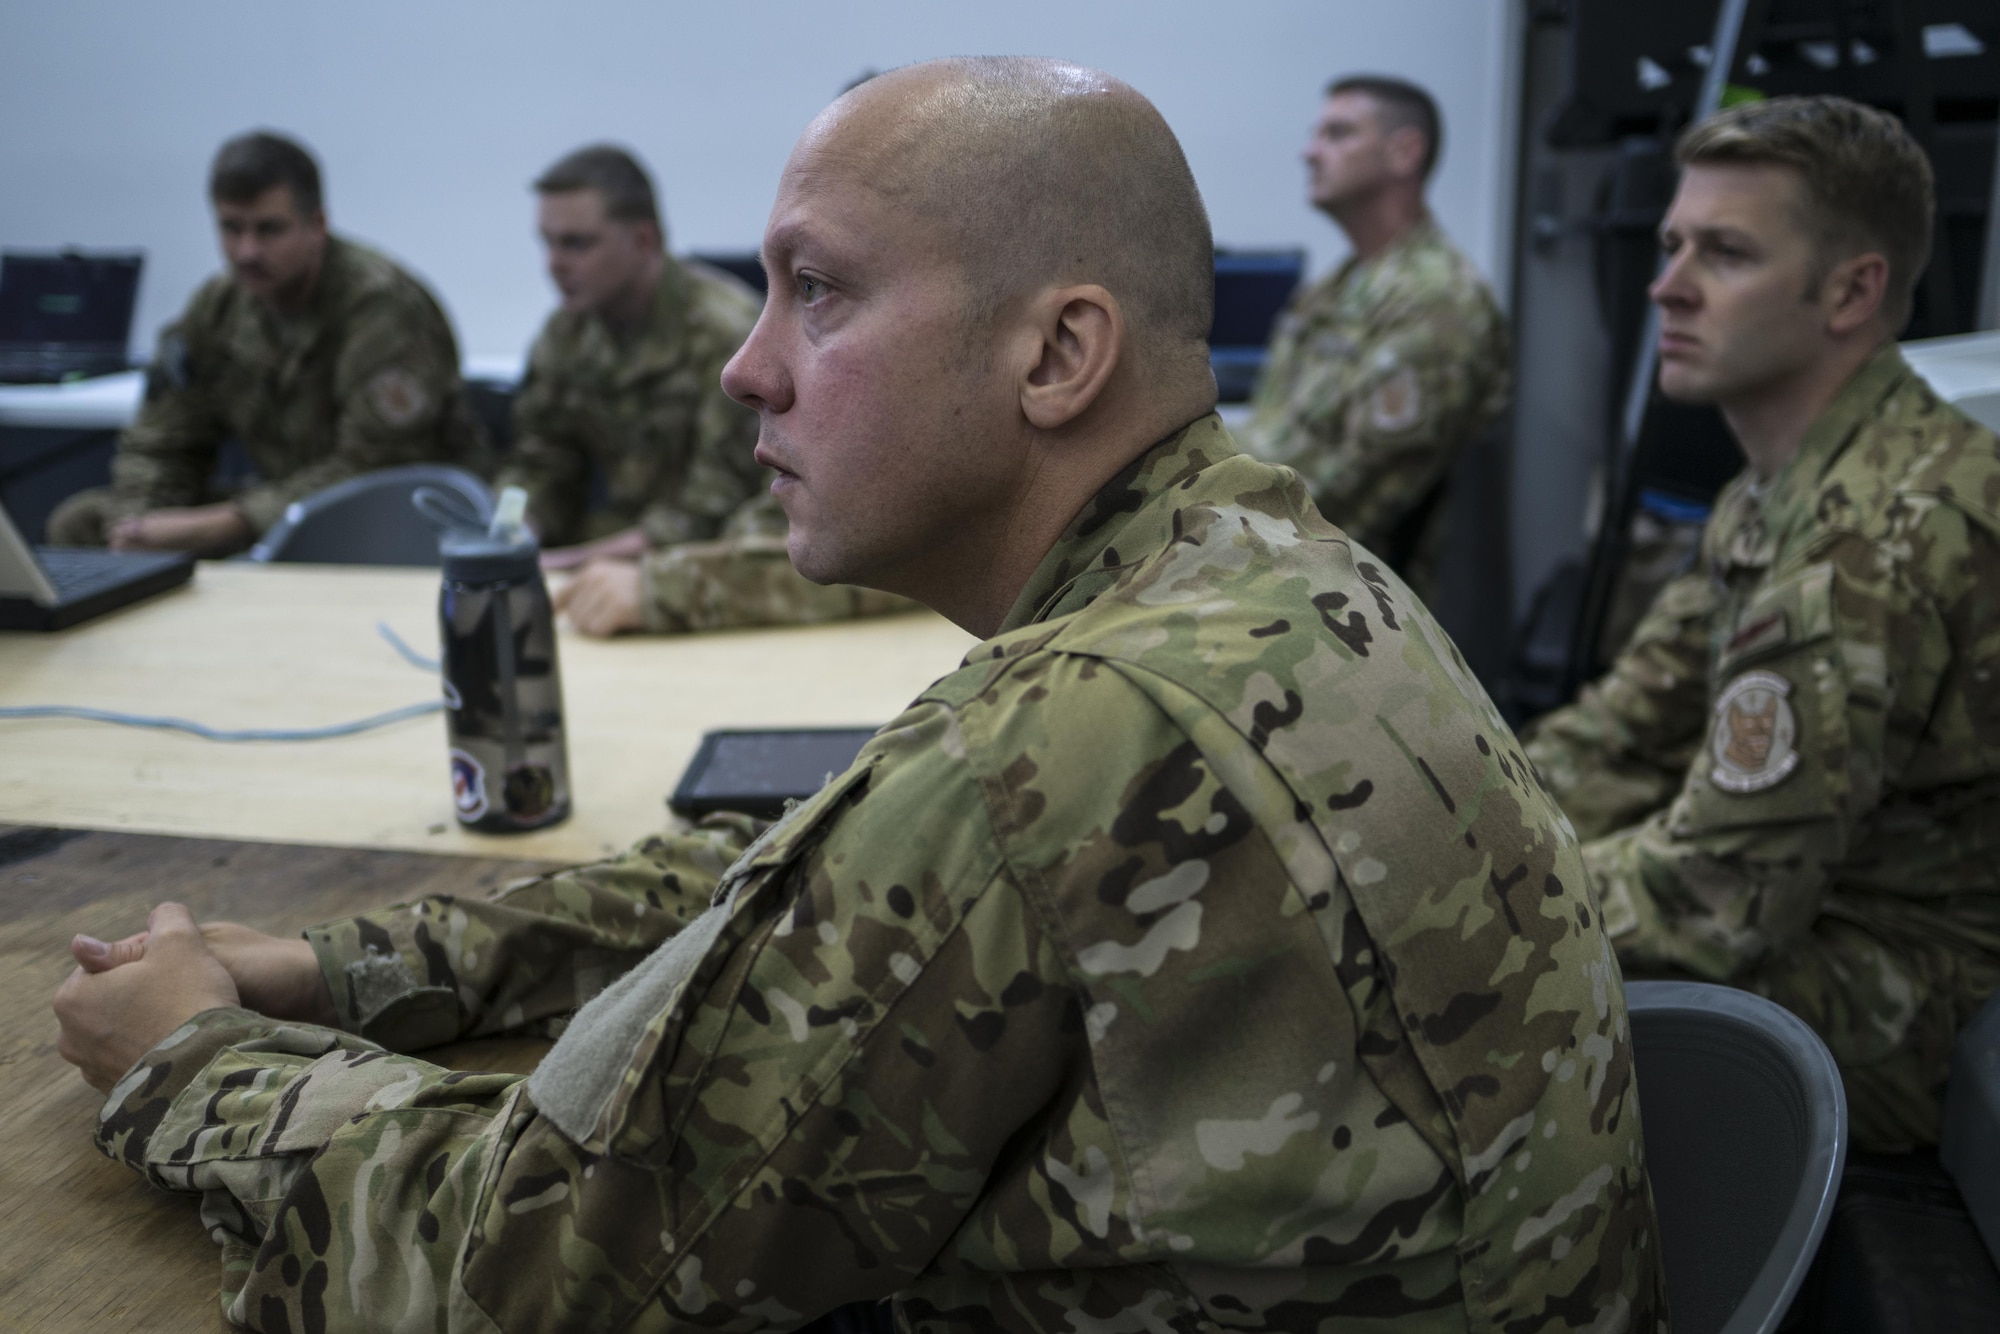 U.S. Air Force 17th Special Operations Squadron aircrew listen to the intelligence briefing provided by the 353rd Special Operations Group intelligence team July 9, 2017, at Rockhampton, Australia. The uniquely complex and challenging multinational environment provides realistic warfighting training for the special operations forces. (U.S. Air Force photo by Capt. Jessica Tait)